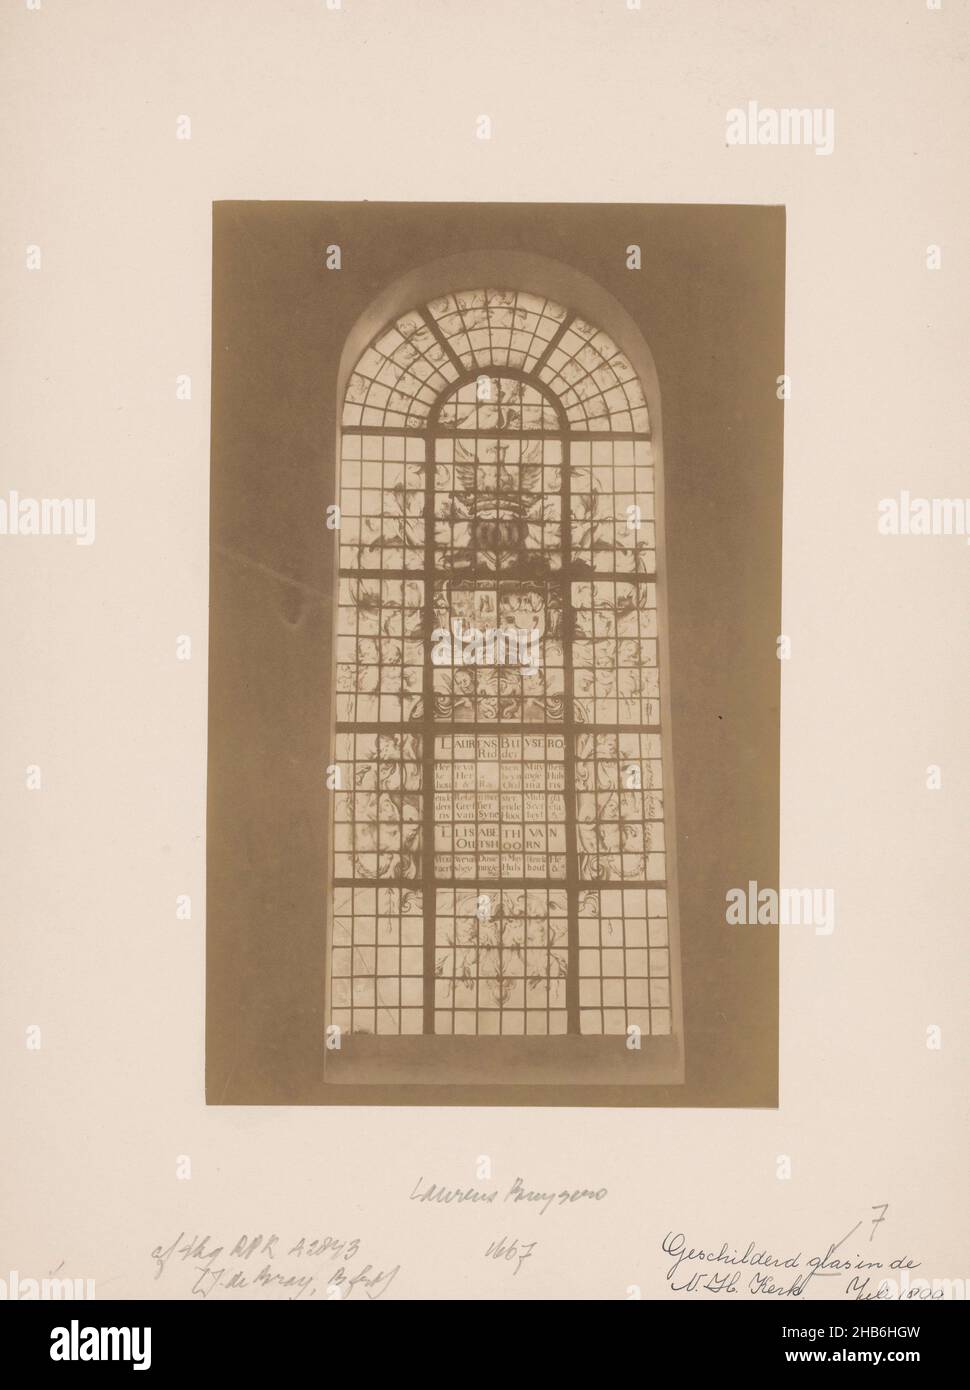 Painted window in the Oudshoorn Church in Oudshoorn, anoniem (Monumentenzorg) (attributed to), Oudshoorn, 1899, photographic support, cardboard, albumen print, height 209 mm × width 132 mm Stock Photo